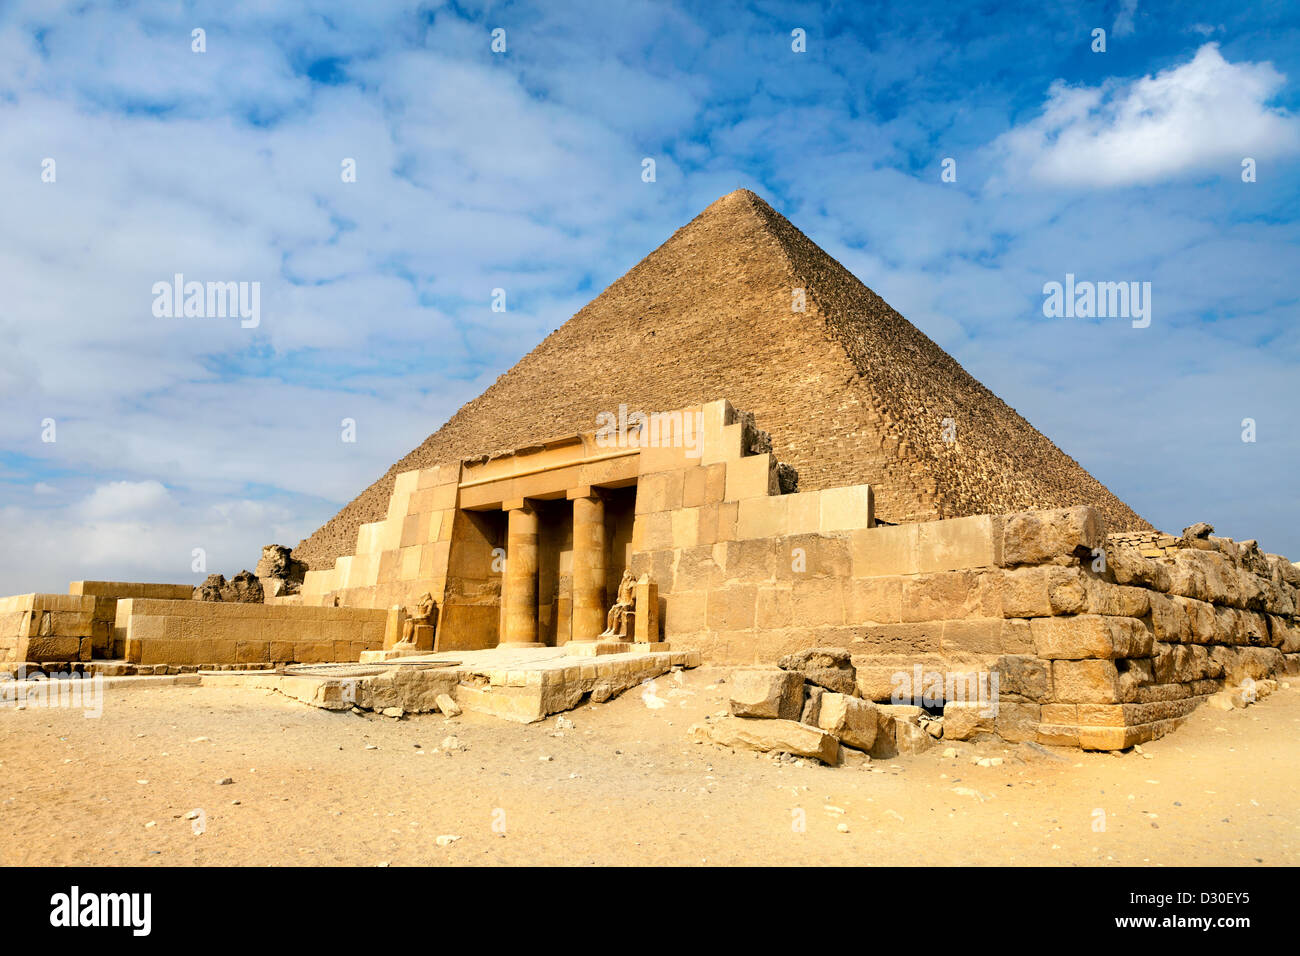 View of one of the Great Pyramids in Giza, Egypt Stock Photo